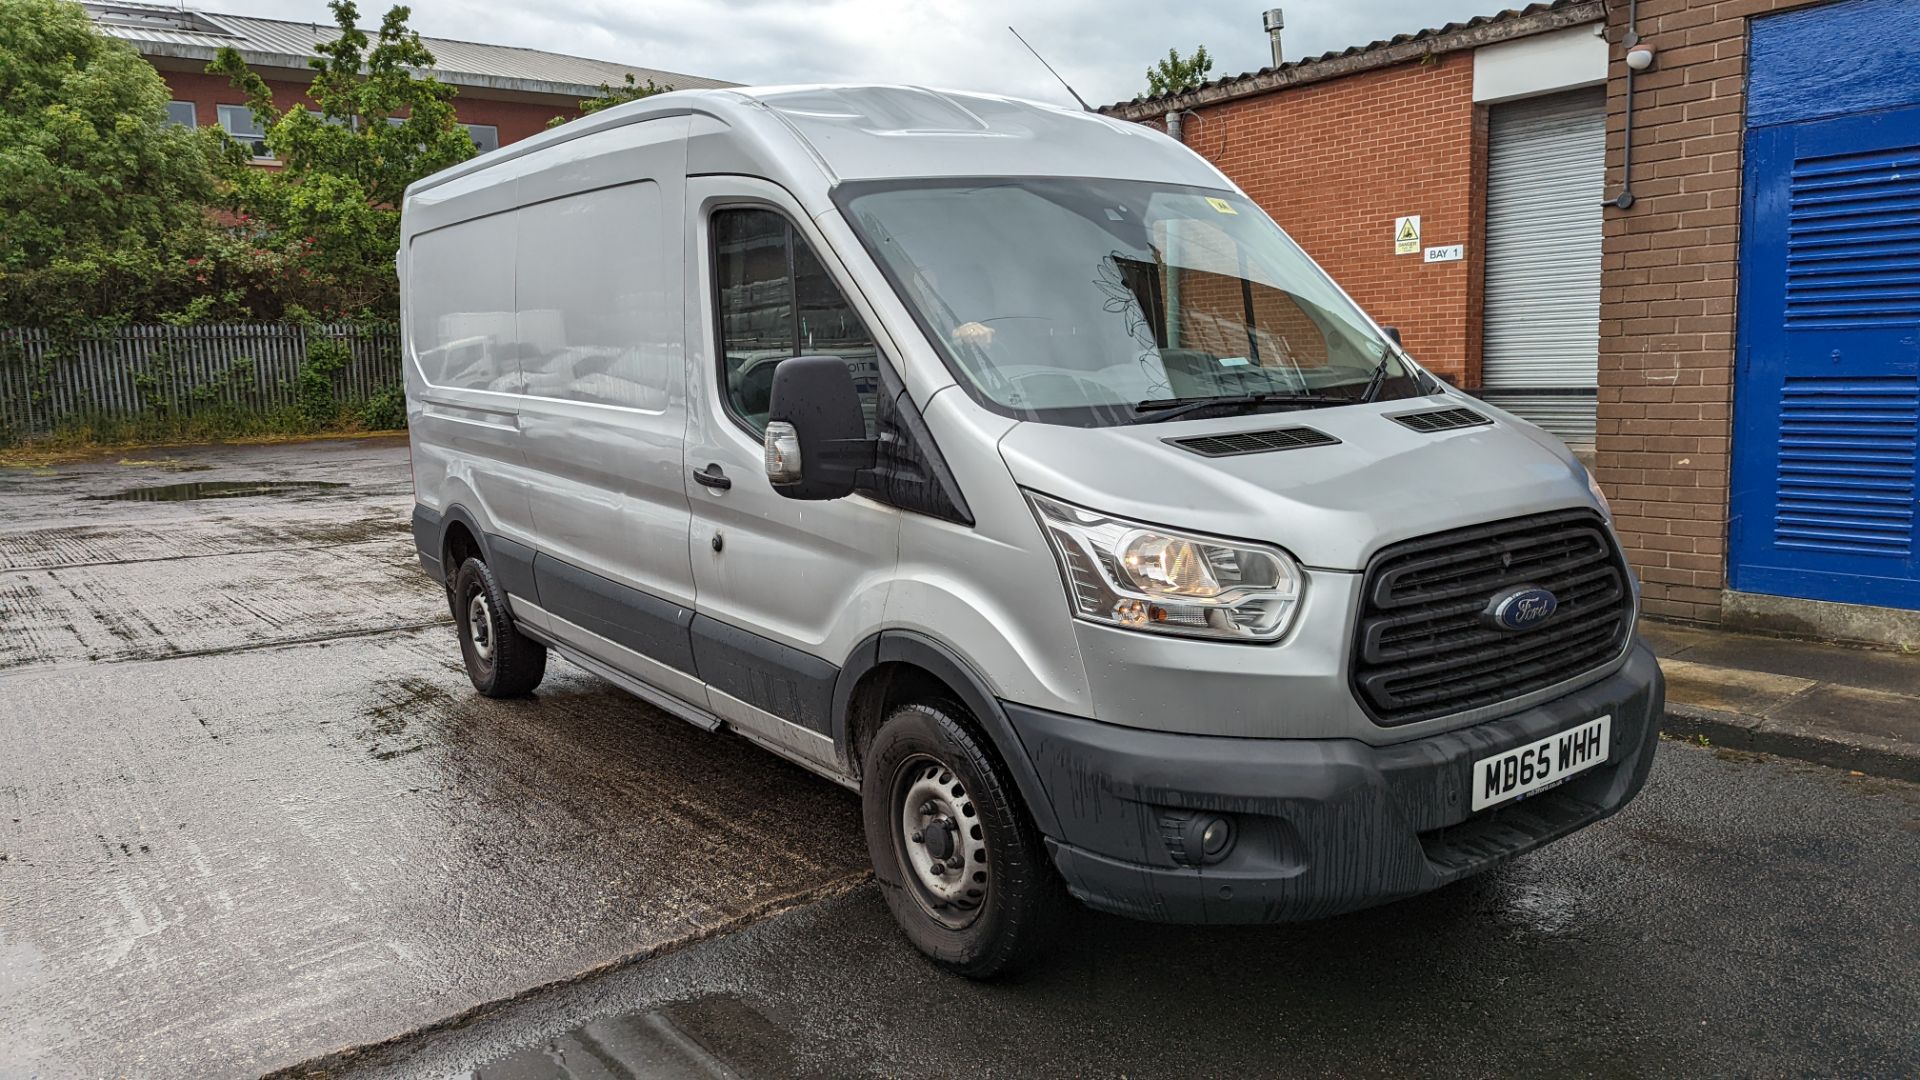 MD65 WHH Ford Transit 350, 6-speed manual gearbox, 2198cc diesel engine, 5981mm x 2550mm. Colour: Si - Image 2 of 51